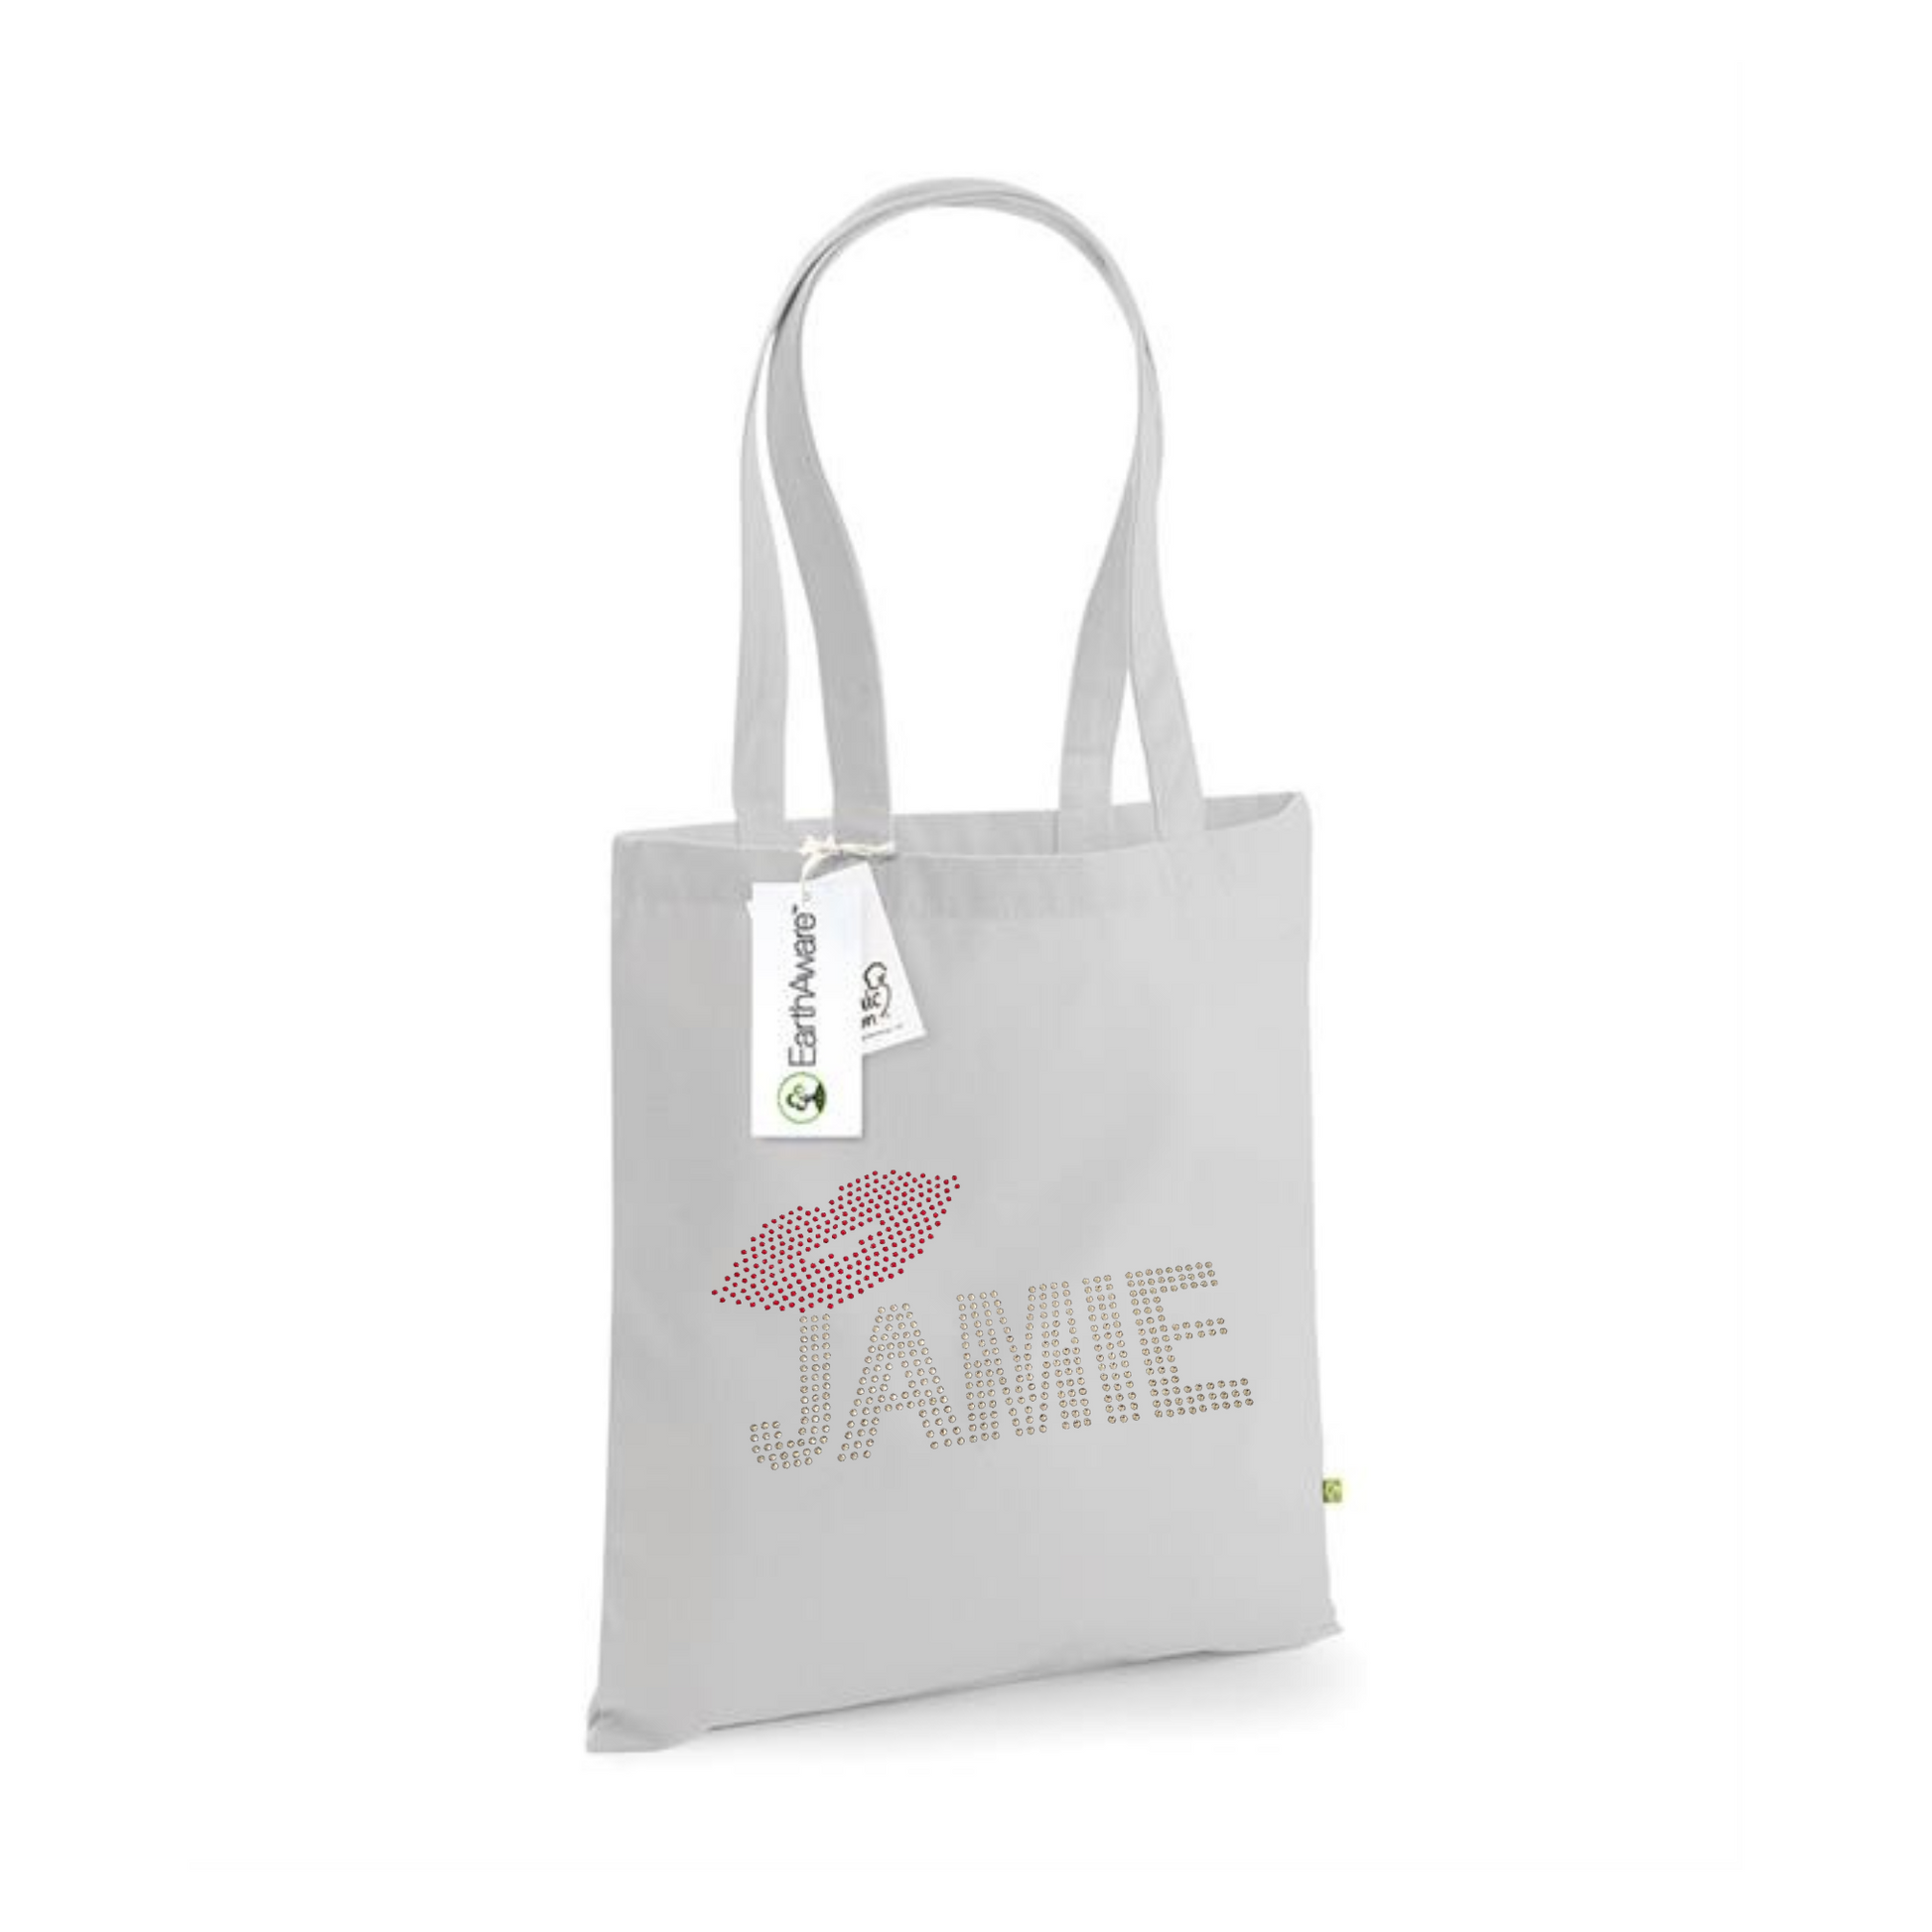 Strong light grey rectangular tote bag with silver rhinestones detailing Jamie and red rhinestones lips, very sparkly